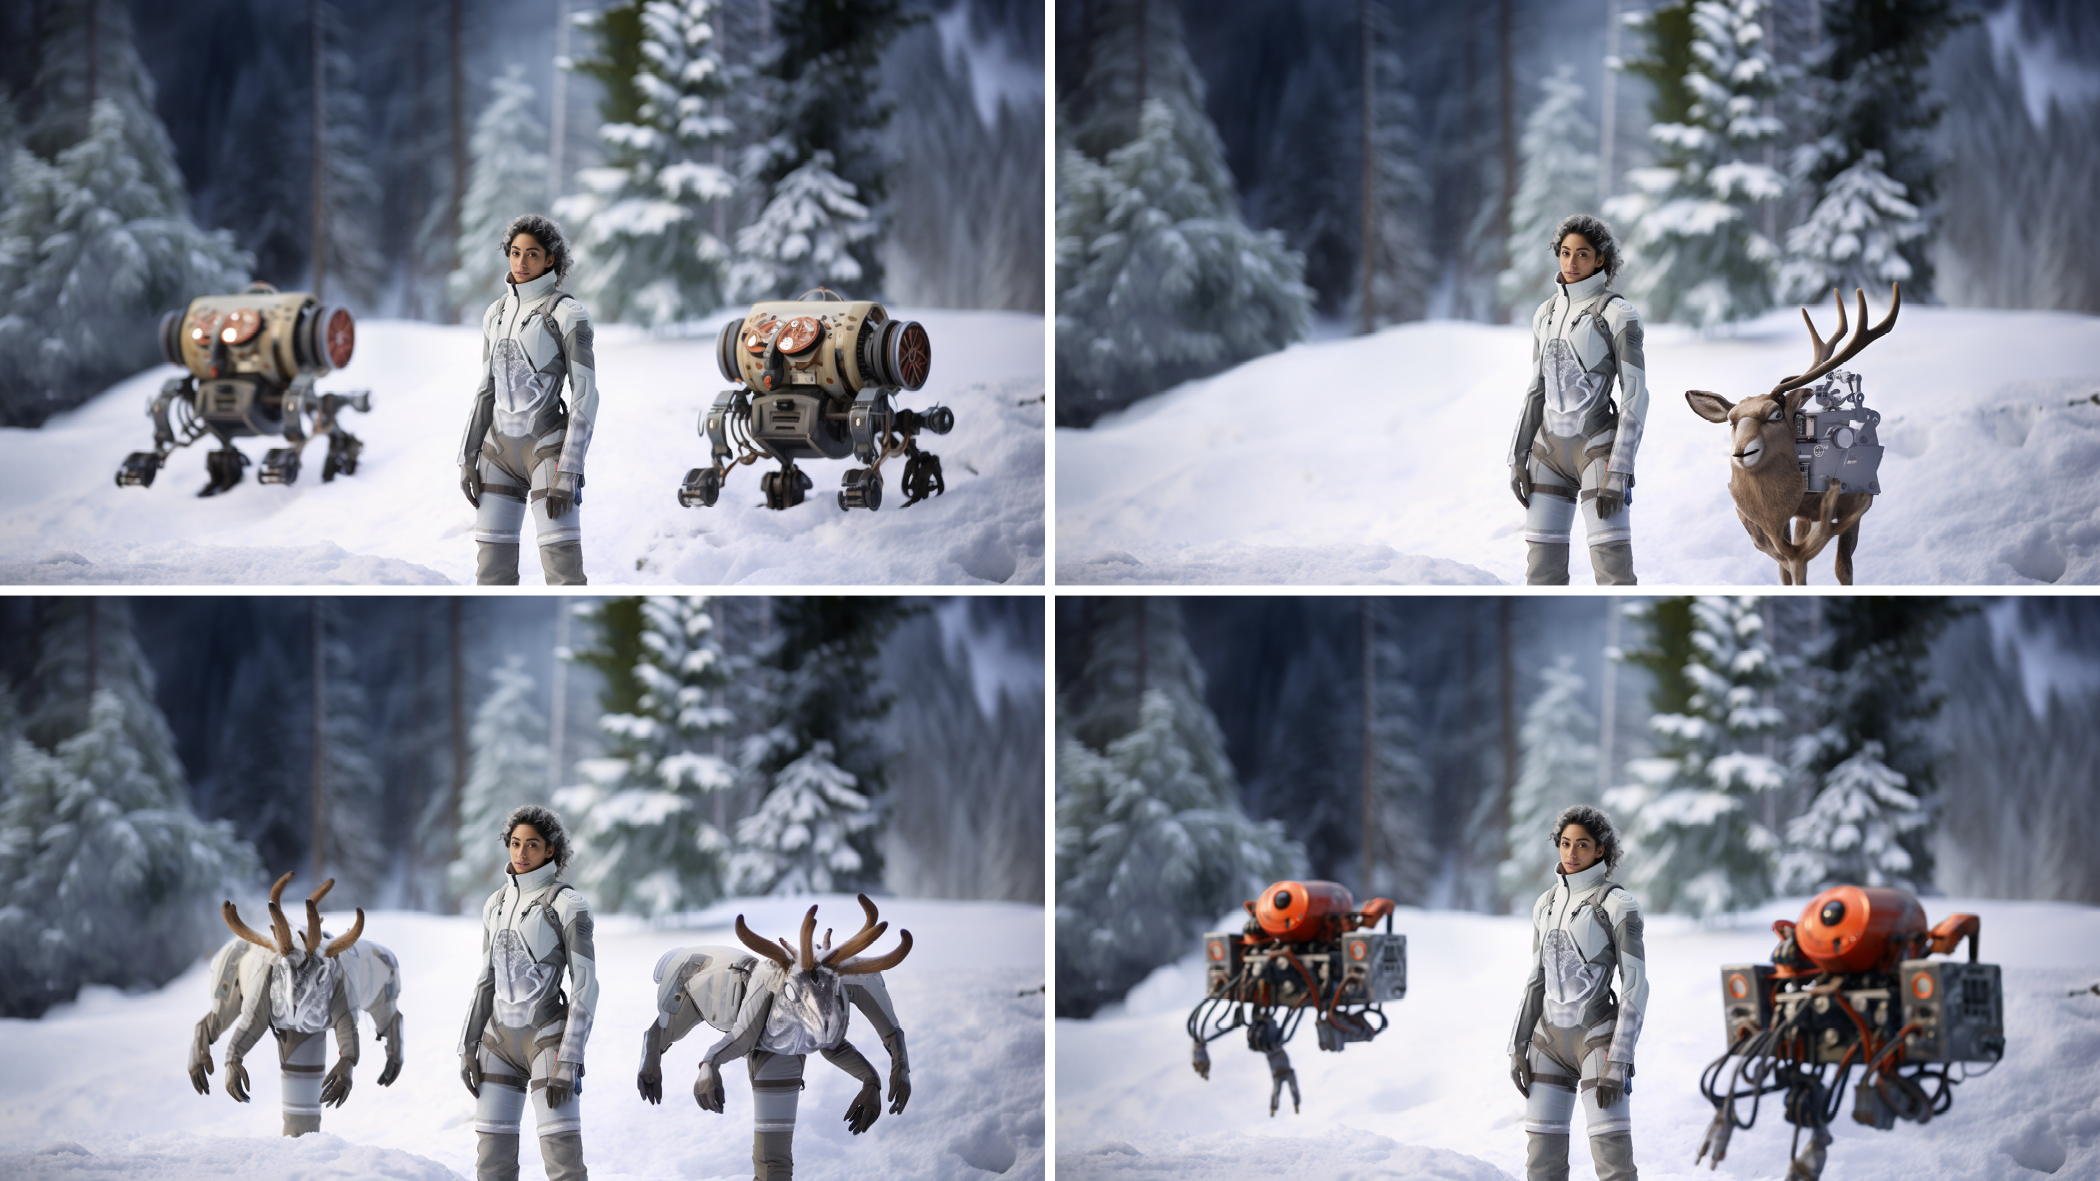 A collage of four images of the same person wearing a spacesuit in a snowy forest with various depictions of a robotic reindeer.